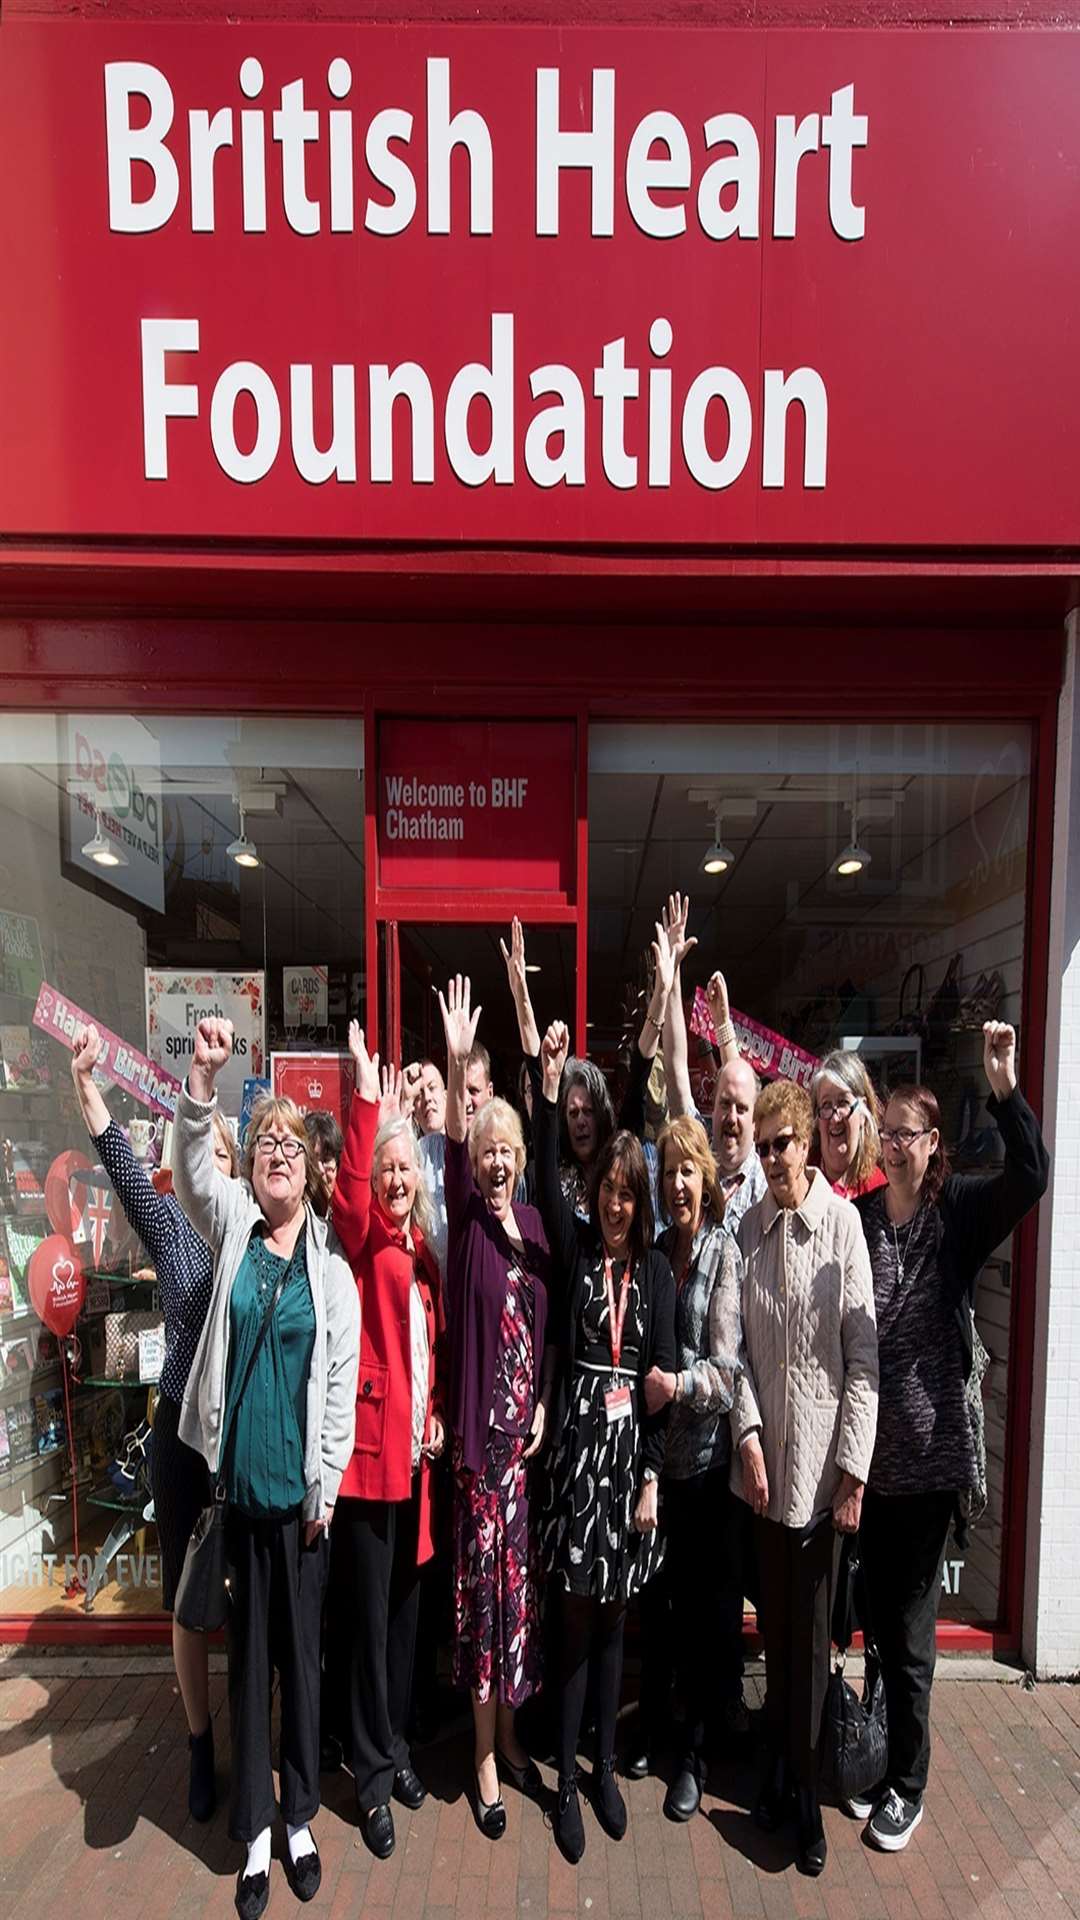 Staff and volunteers celebrate 25 years of Chatham charity shop